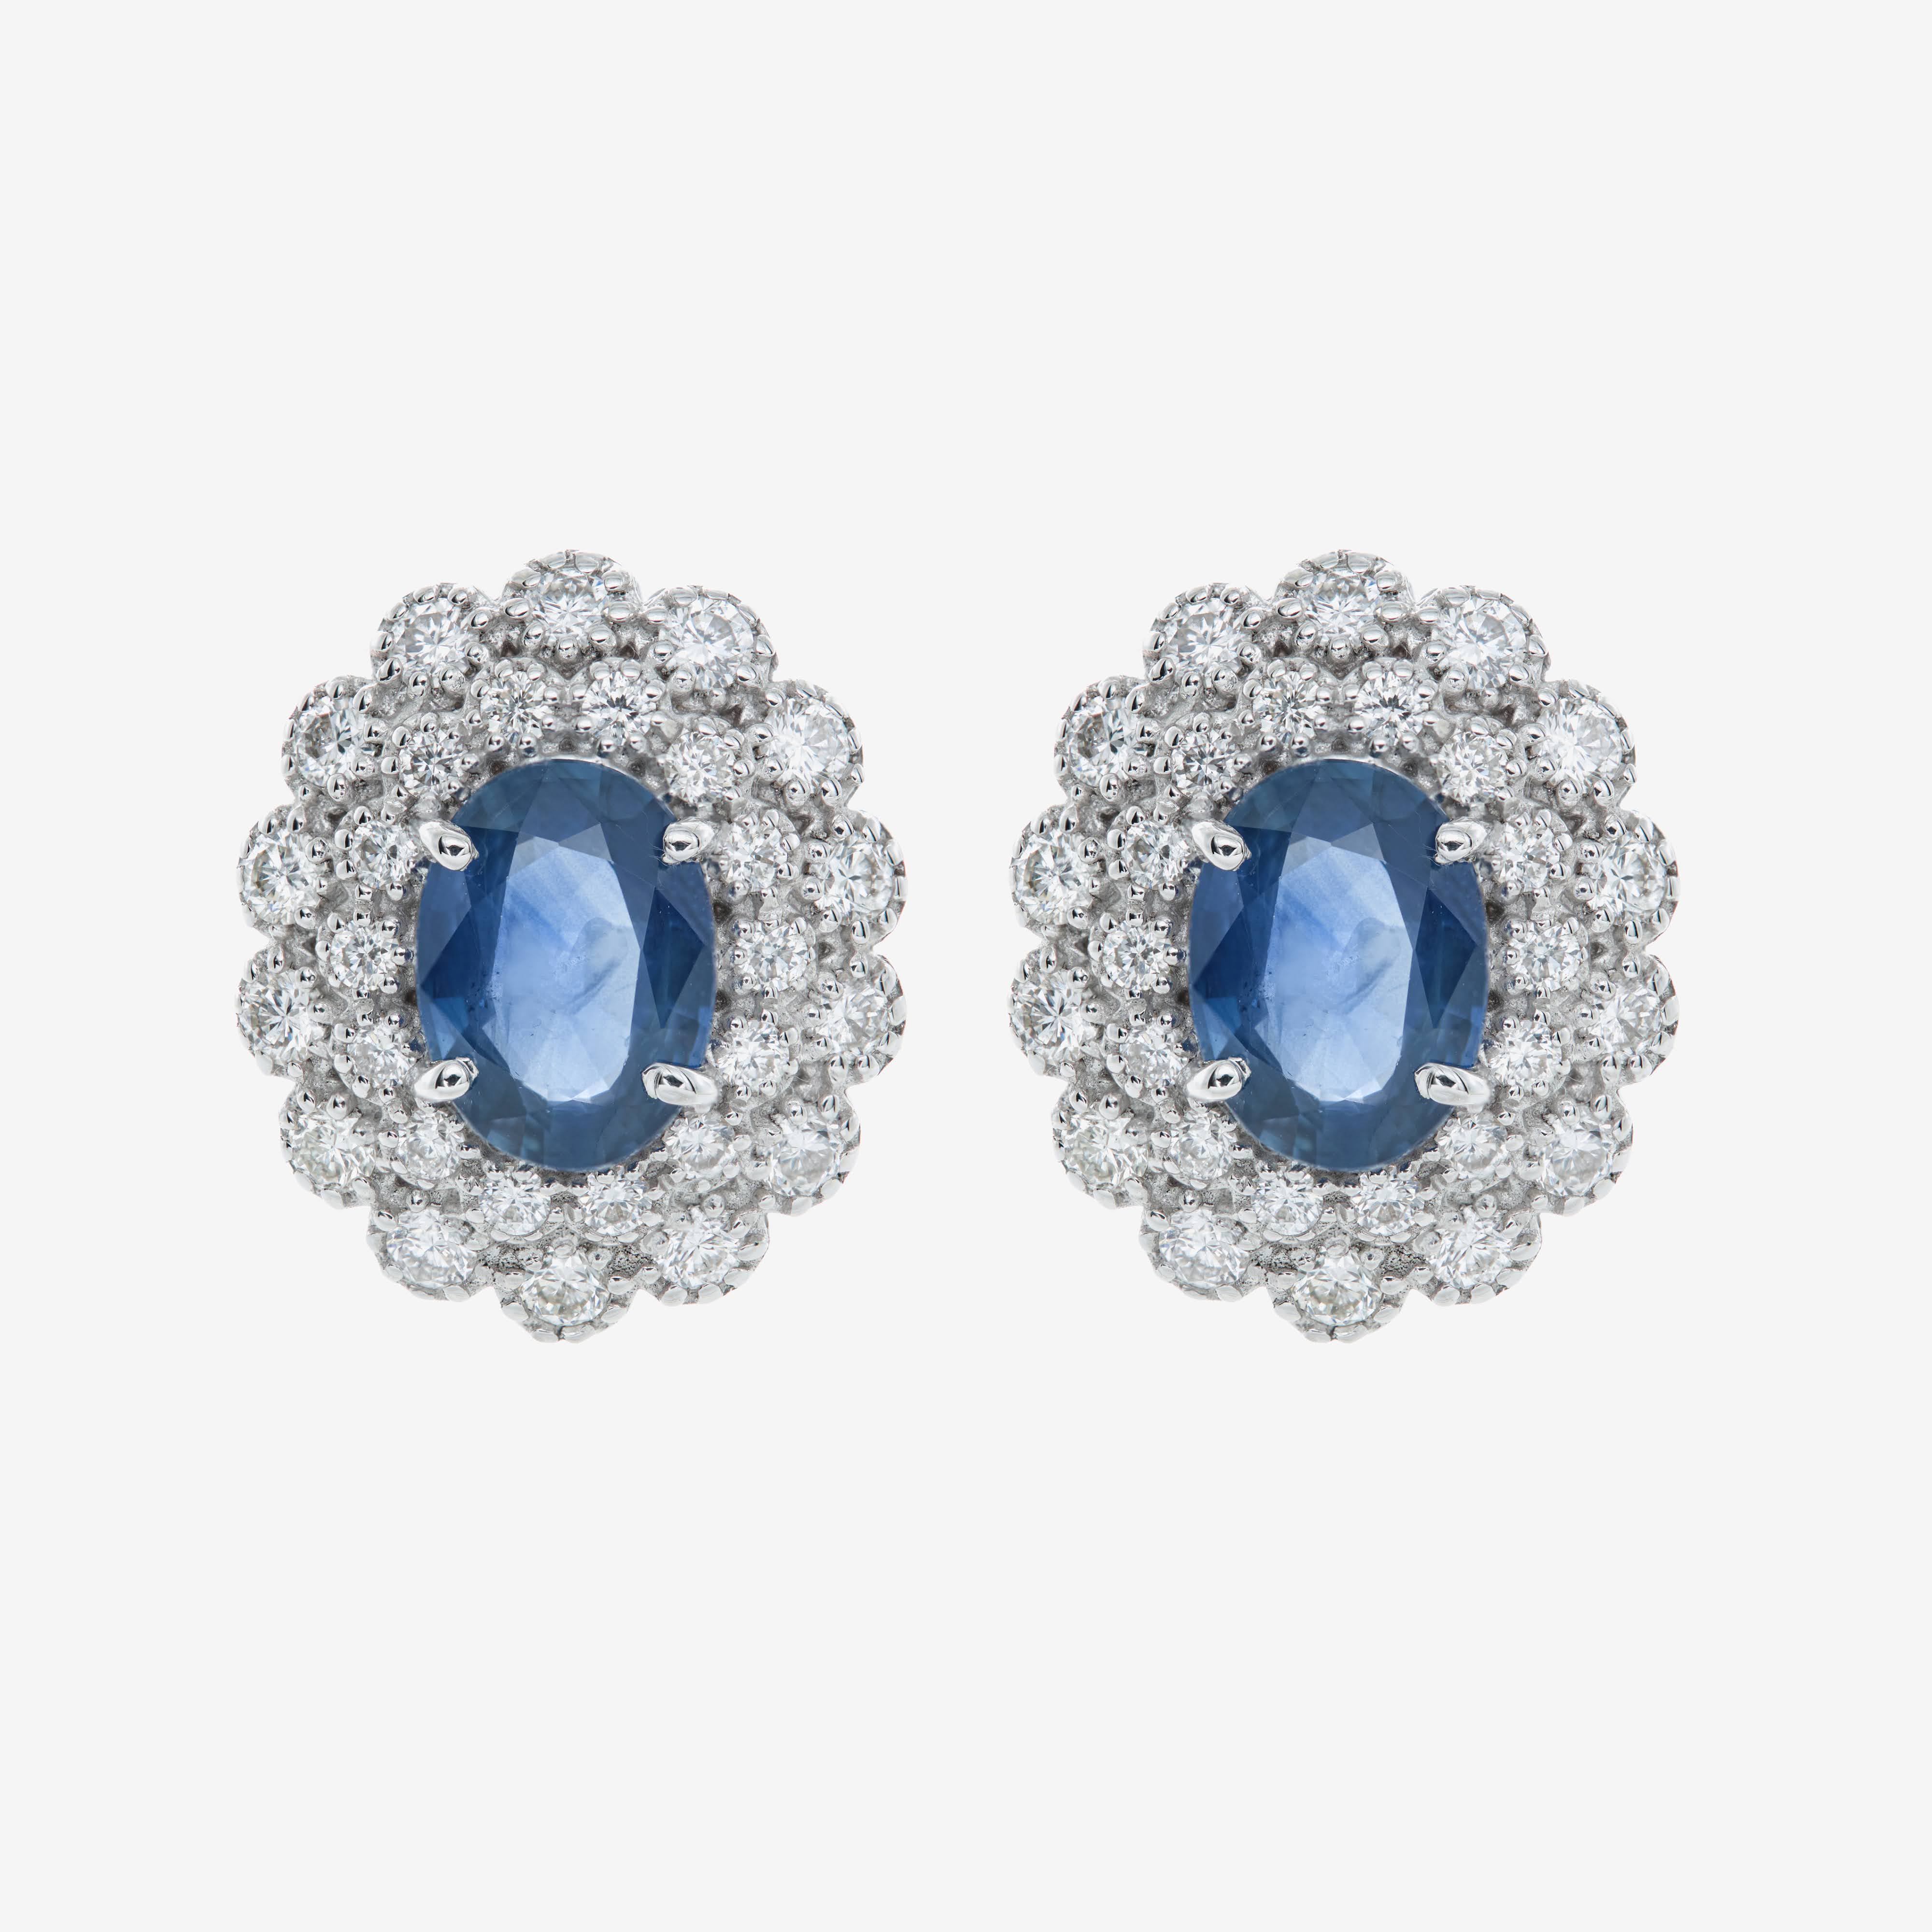 Petra earrings with sapphires and diamonds